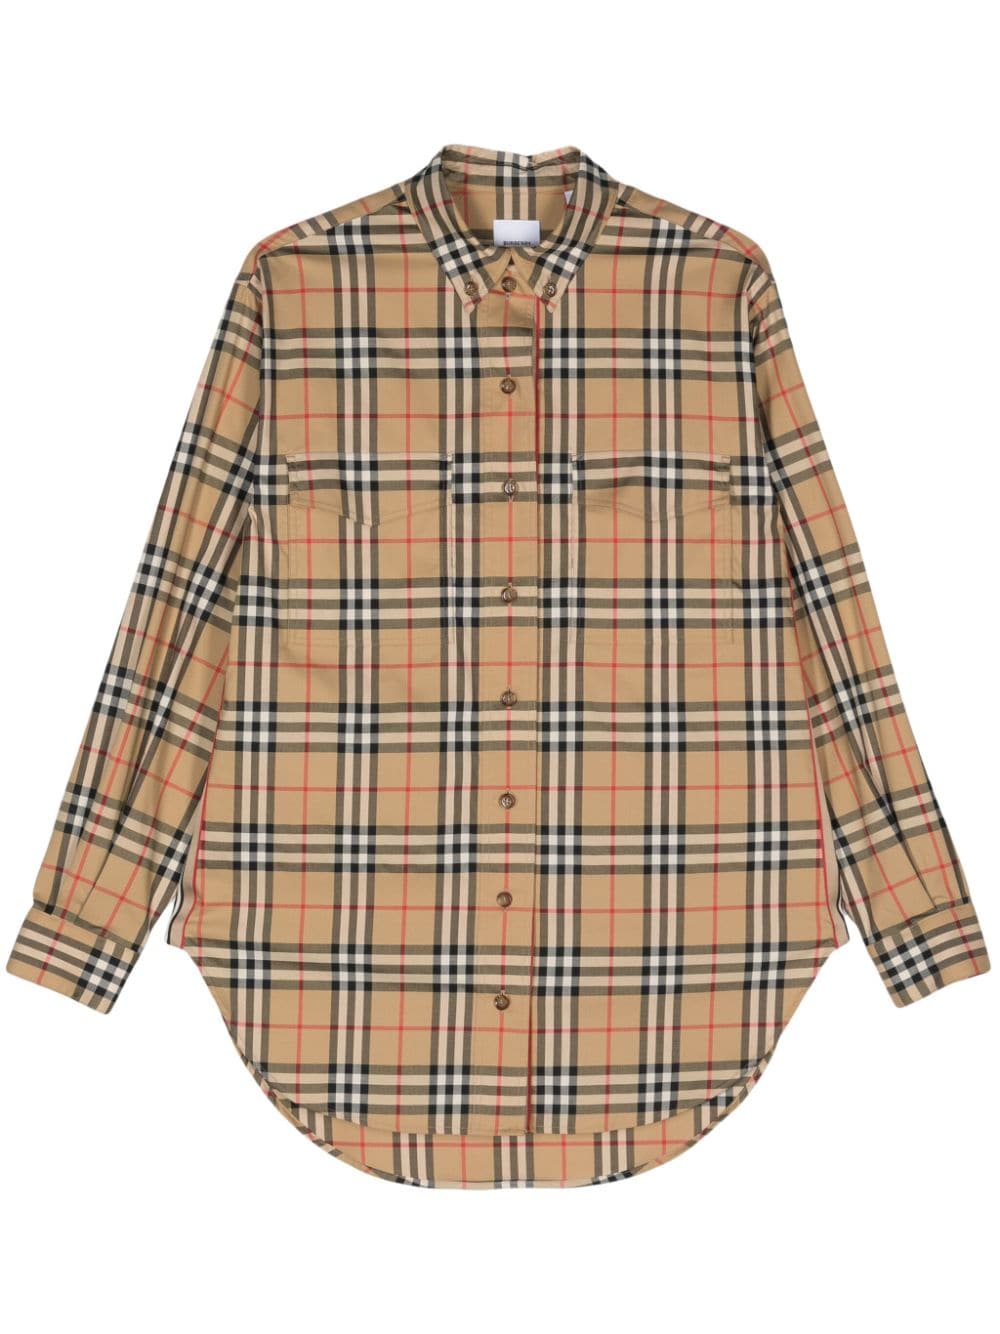 BURBERRY Vintage Check Button-Down Collar Cotton Shirt for Women in Beige